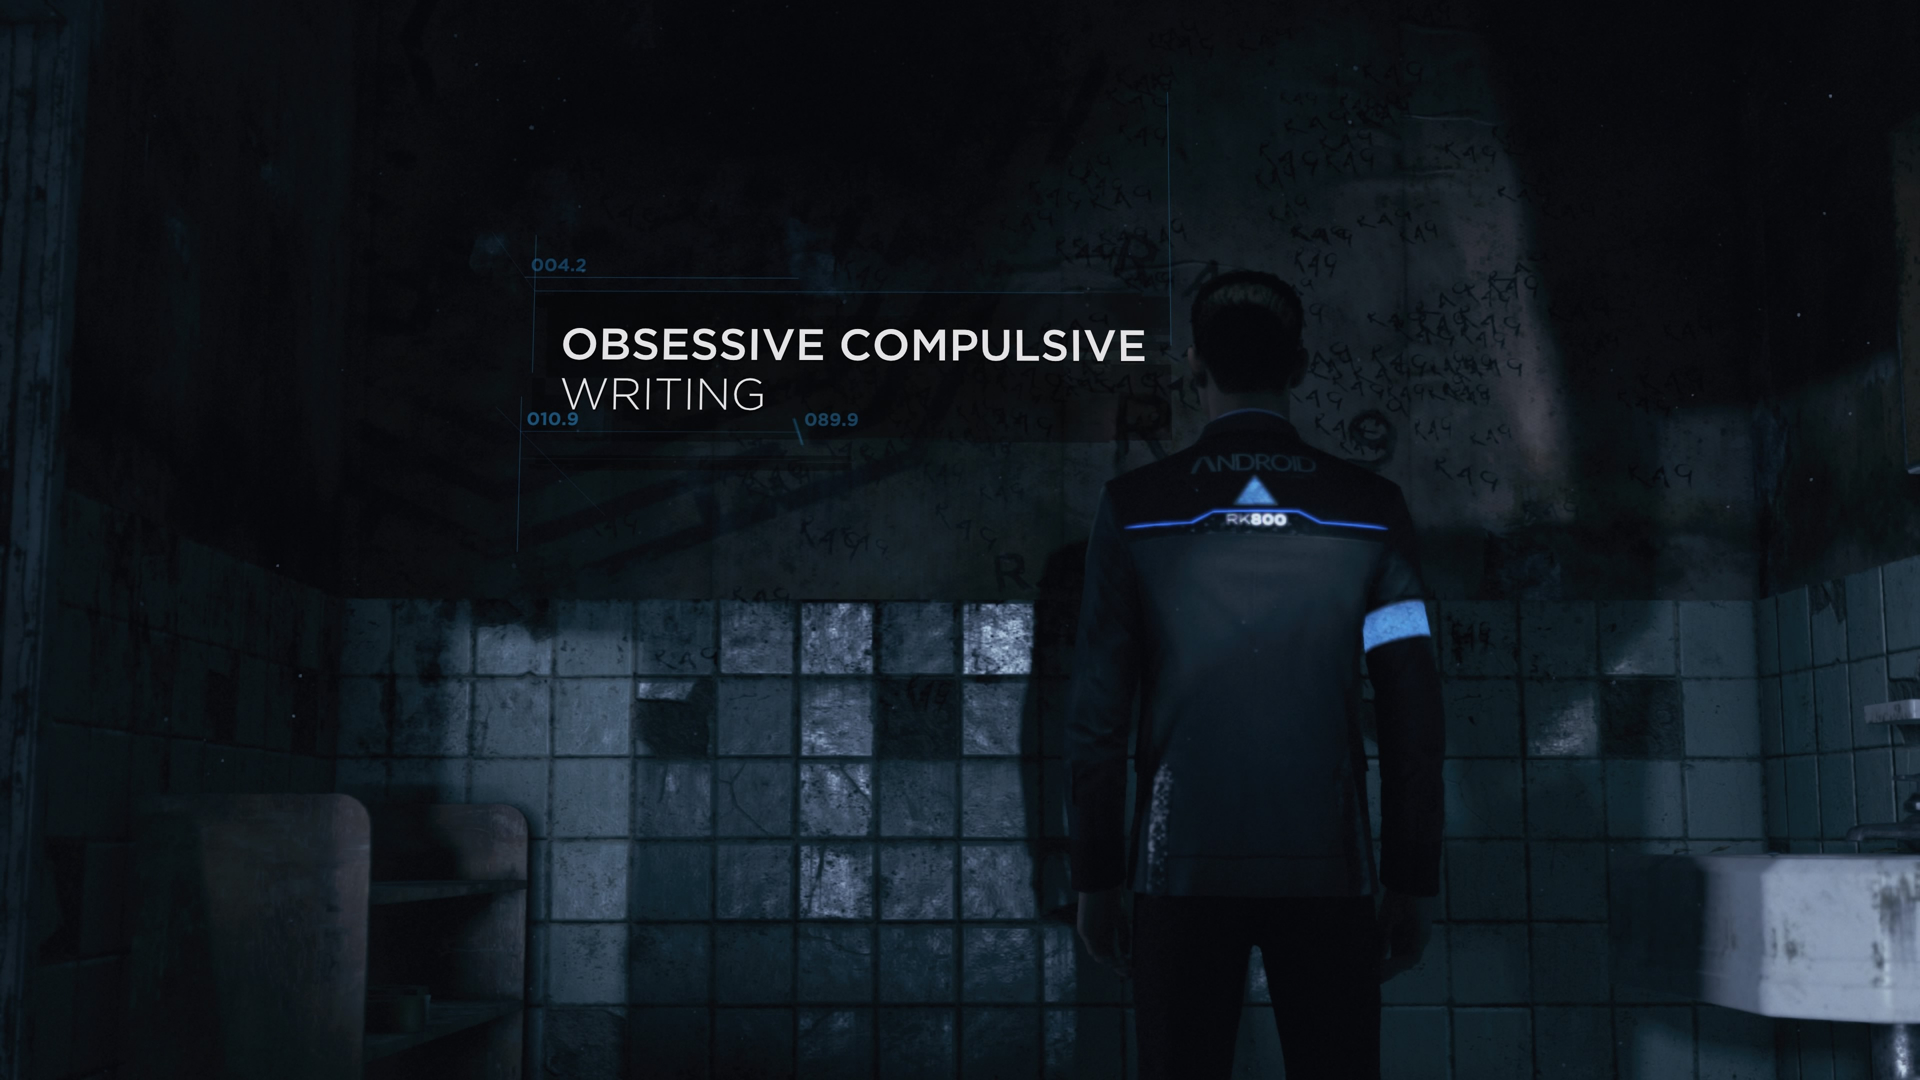 Detroit: Become Human' Review